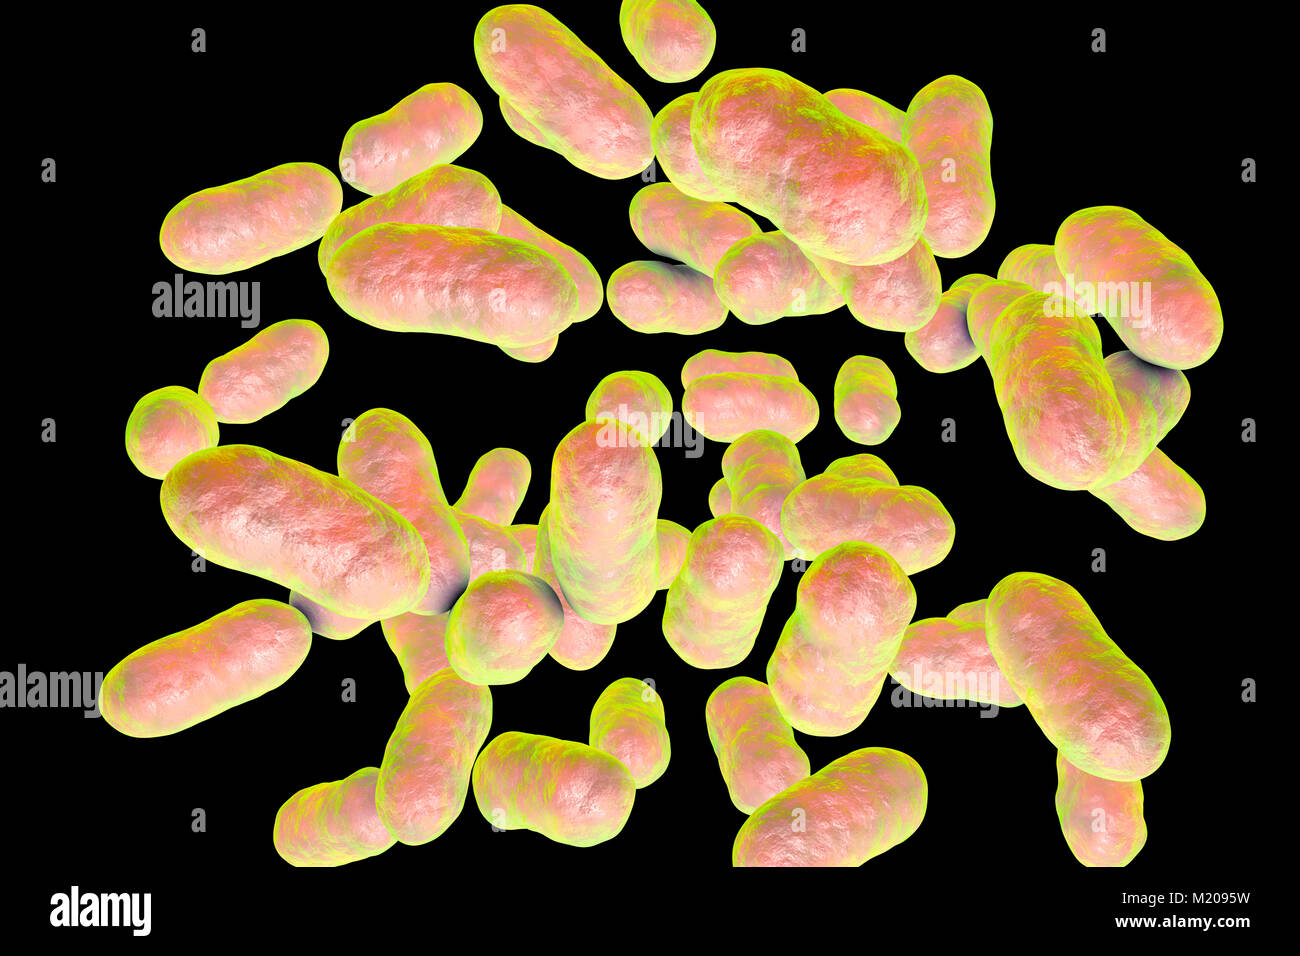 Prevotella bacteria,computer illustration.Prevotella are Gram-negative,anaerobic,rod to coccobacillus shaped,prokaryote (bacterium).One of the common species is Prevotella melaninogenica,formerly known as Bacteroides melaninogenicus.Prevotella melaninogenica is generally found in the oral cavity causing opportunistic infections in humans.However it can also be found in others areas of the body,such as the intestine,where opportunistic infections can occur.Prevotella melaninogenica is found in the rumen of cattle and sheep where it helps to break down protein and carbohydrates. Stock Photo